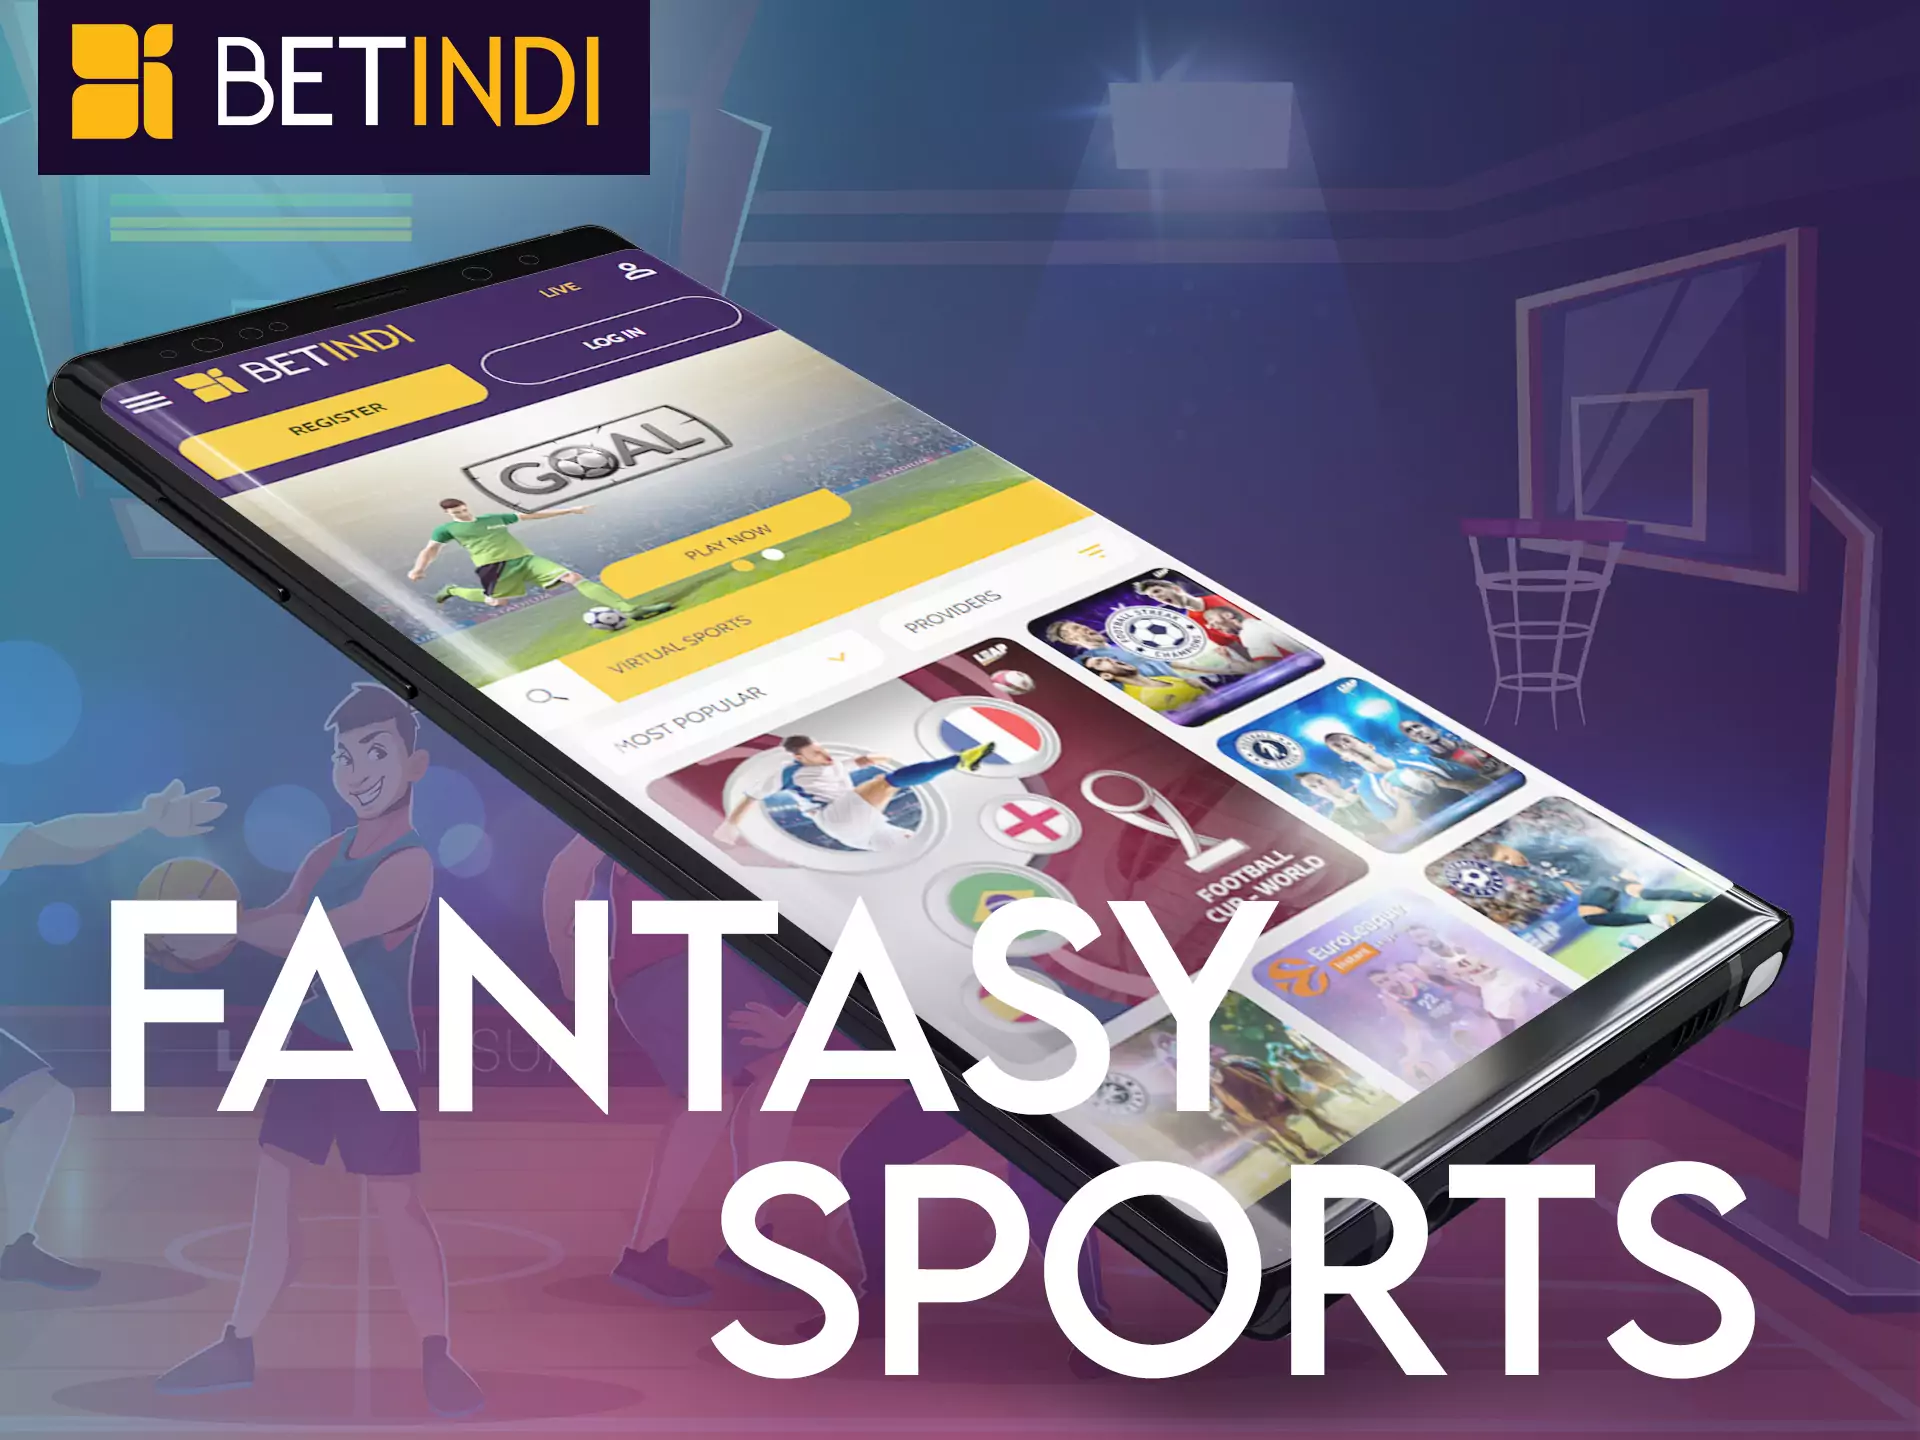 Choose the playing conditions for athletes and teams and place bets on fantasy sports on Betindi.